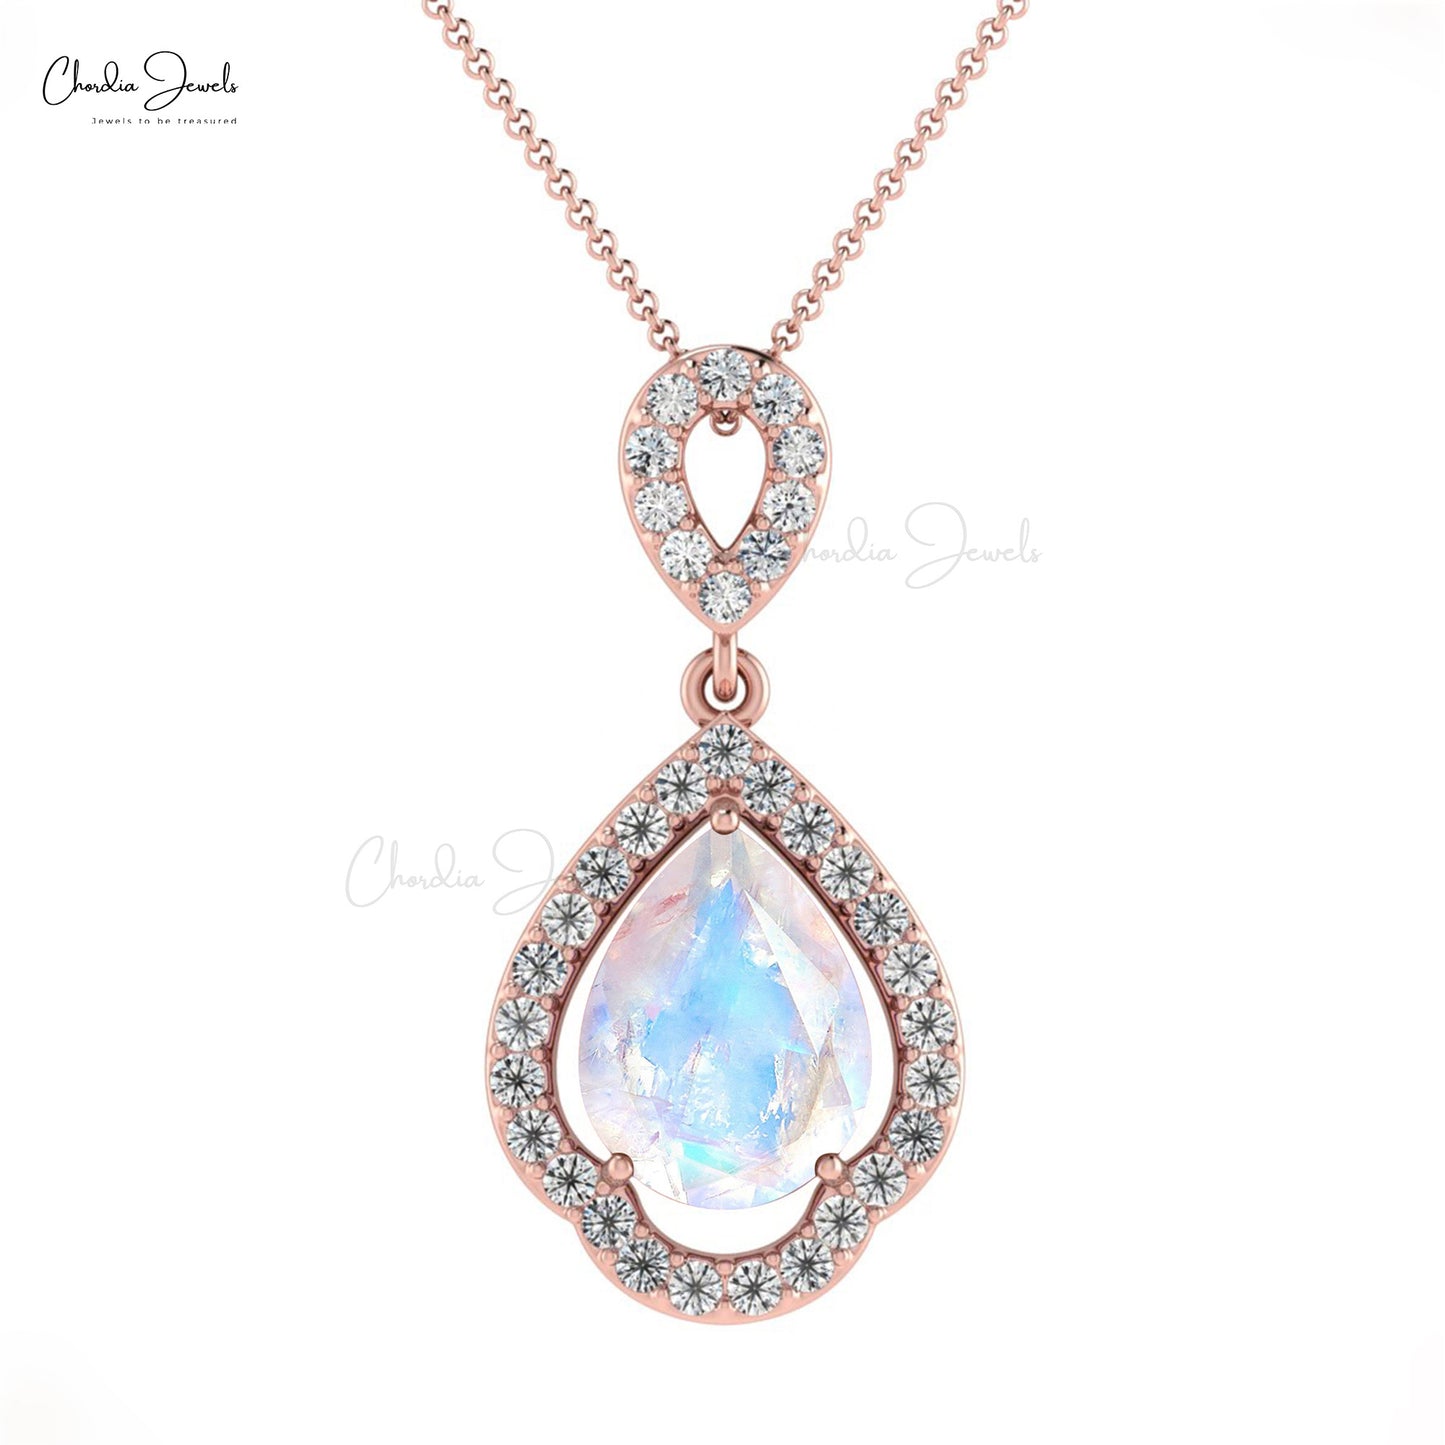 Unique Art Deco Rainbow Moonstone Pendant with Complimentary Silver Chain